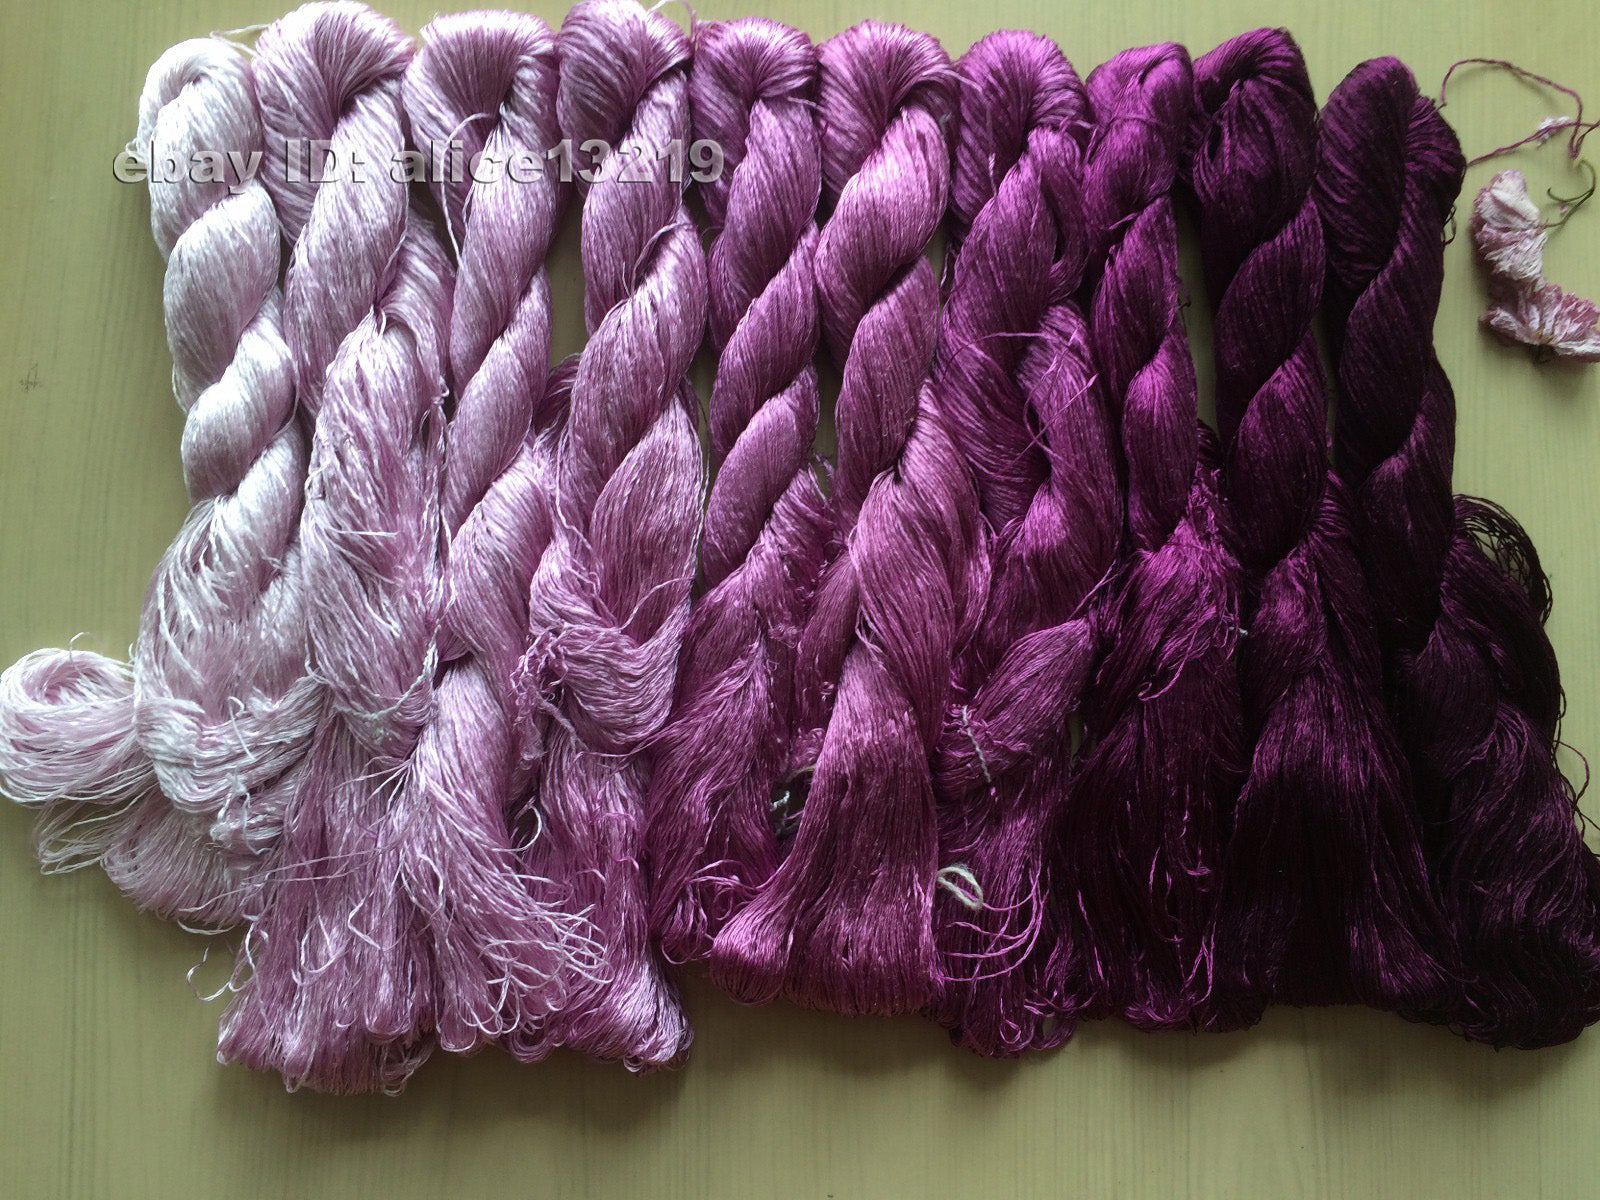 10bundles 100%real mulberry silk,hand-dyed embroidery silk floss/thread N101